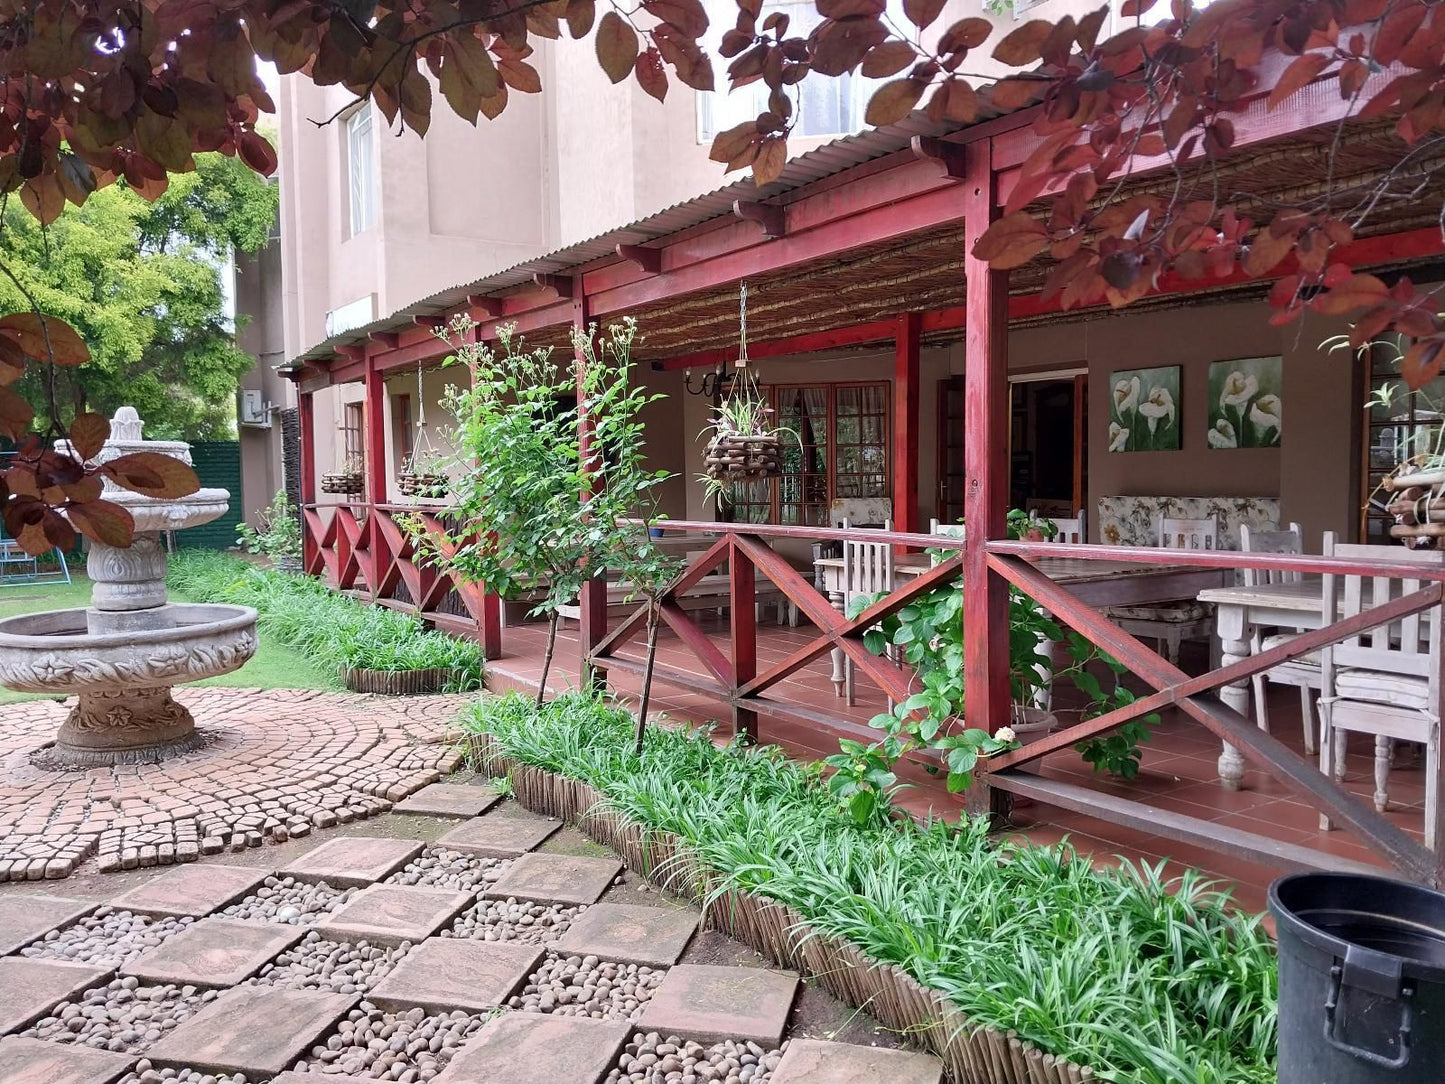 Lily Guesthouse Bayswater Bloemfontein Free State South Africa House, Building, Architecture